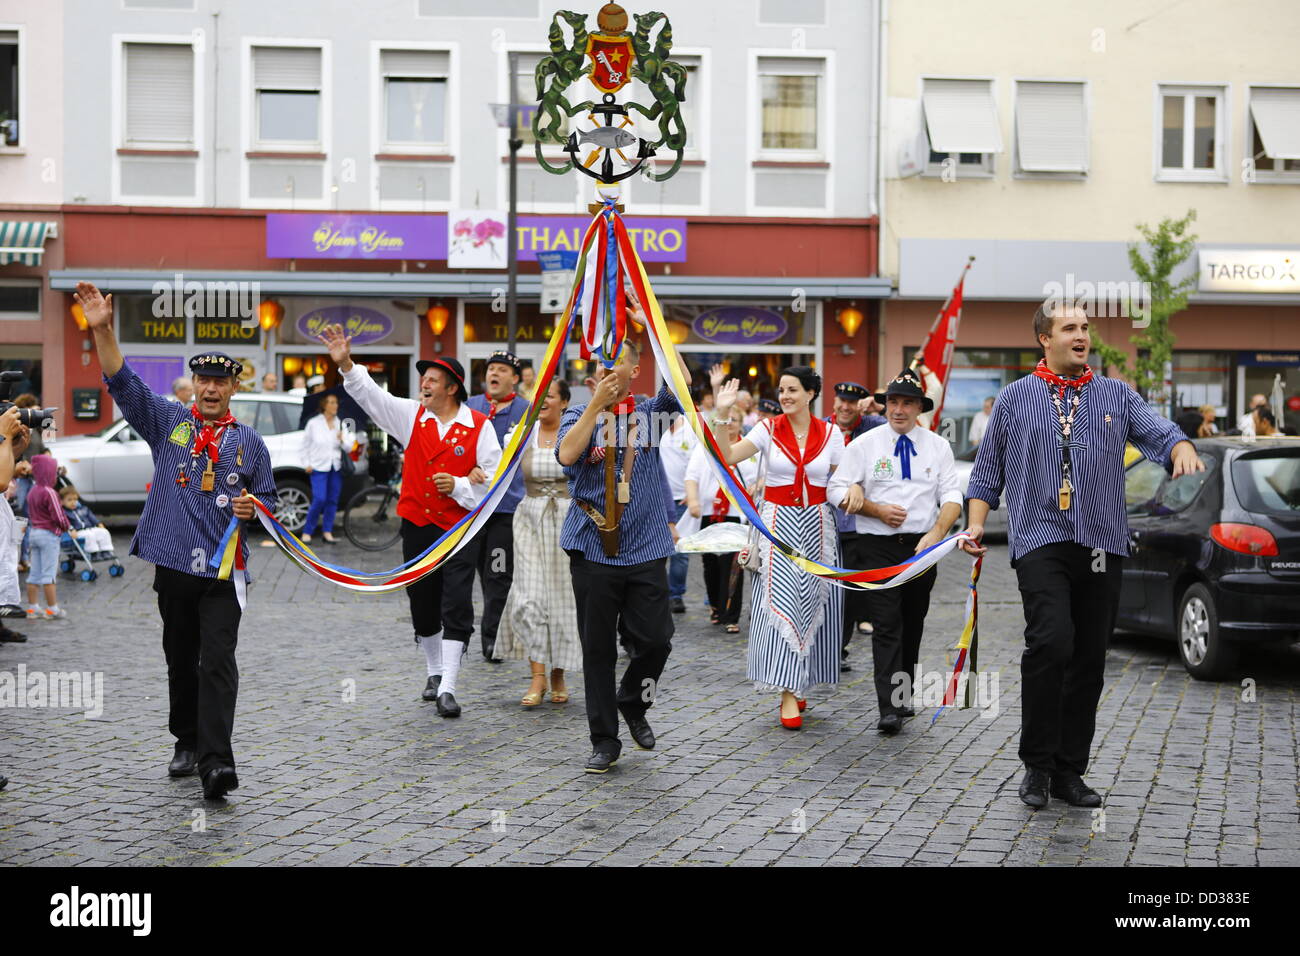 Worms, Germany. 25th August 2013. The BojemŠŠschter vun de FischerwŠŠd (mayor of the fishermenÕs lea), Markus Trapp (2. R), and his bride Jana Berger (3. R) march to the opening ceremony together with the representatives of the old fishermen's Guild of Worms. The largest wine fair along the Rhine, the Backfischfest, started its 80th anniversary in  Worms with the traditional handing over of power from the Lord Mayor to the mayor of the fishermenÕs lea. The ceremony included dances and music. Credit:  Michael Debets/Alamy Live News Stock Photo